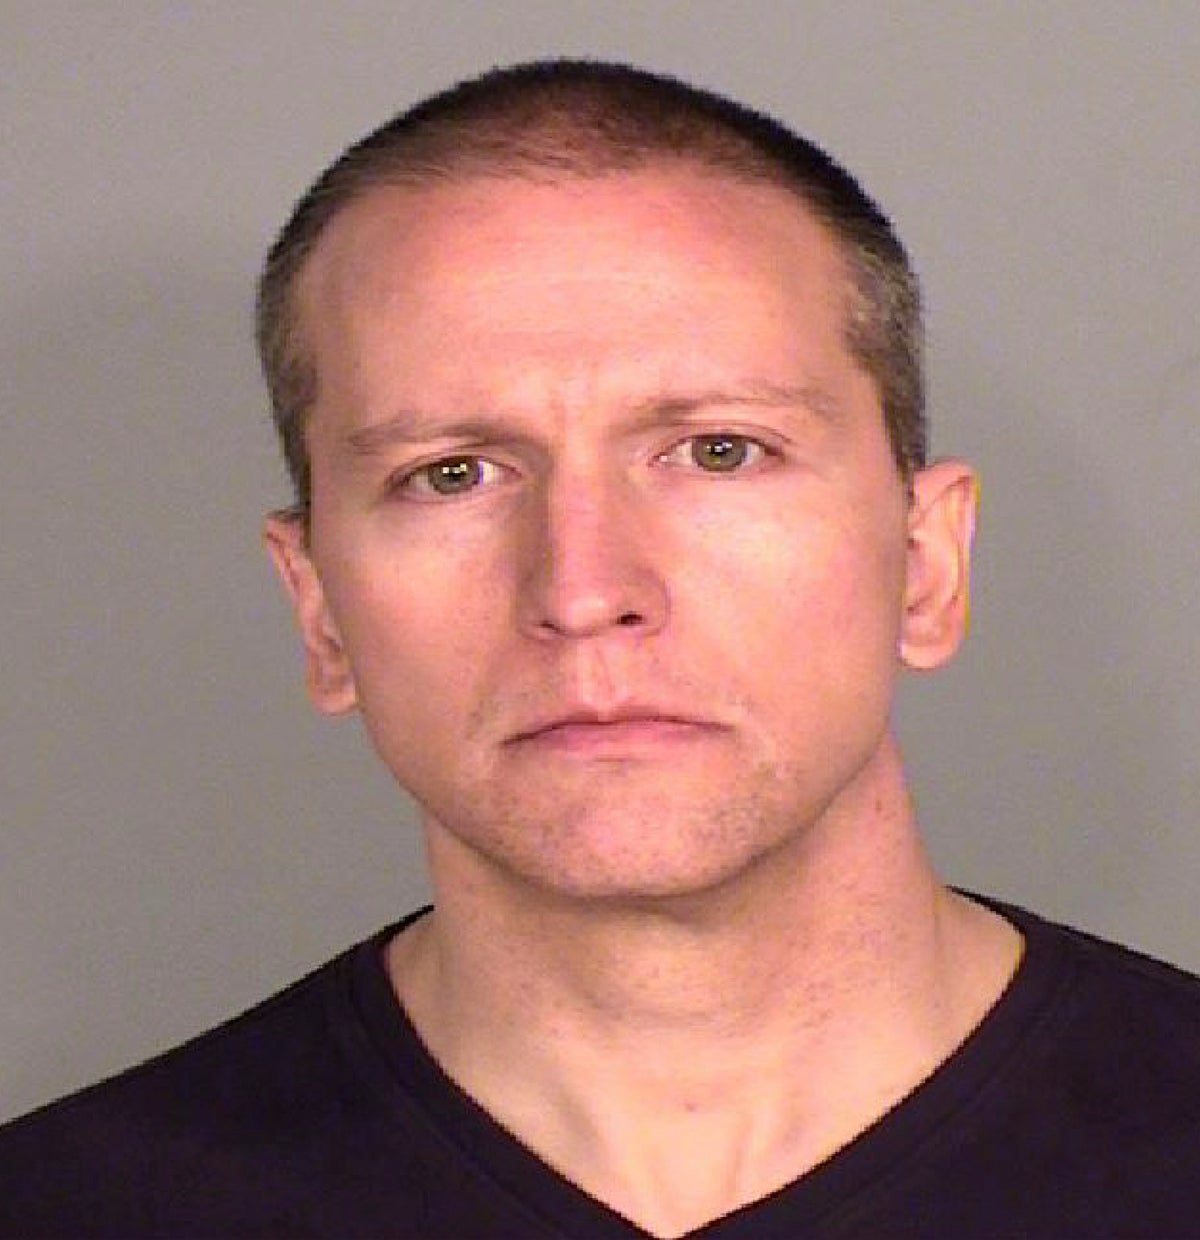 This photo provided by the Ramsey County Sheriff's Office shows former Minneapolis police Officer Derek Chauvin, who was arrested Friday, May 29, 2020, in the Memorial Day death of George Floyd. Chauvin was charged with third-degree murder and second-degree manslaughter after a shocking video of him kneeling for nearly nine minutes on the neck of Floyd, a black man, set off a wave of protests across the country. (Courtesy of Ramsey County Sheriff's Office via AP)